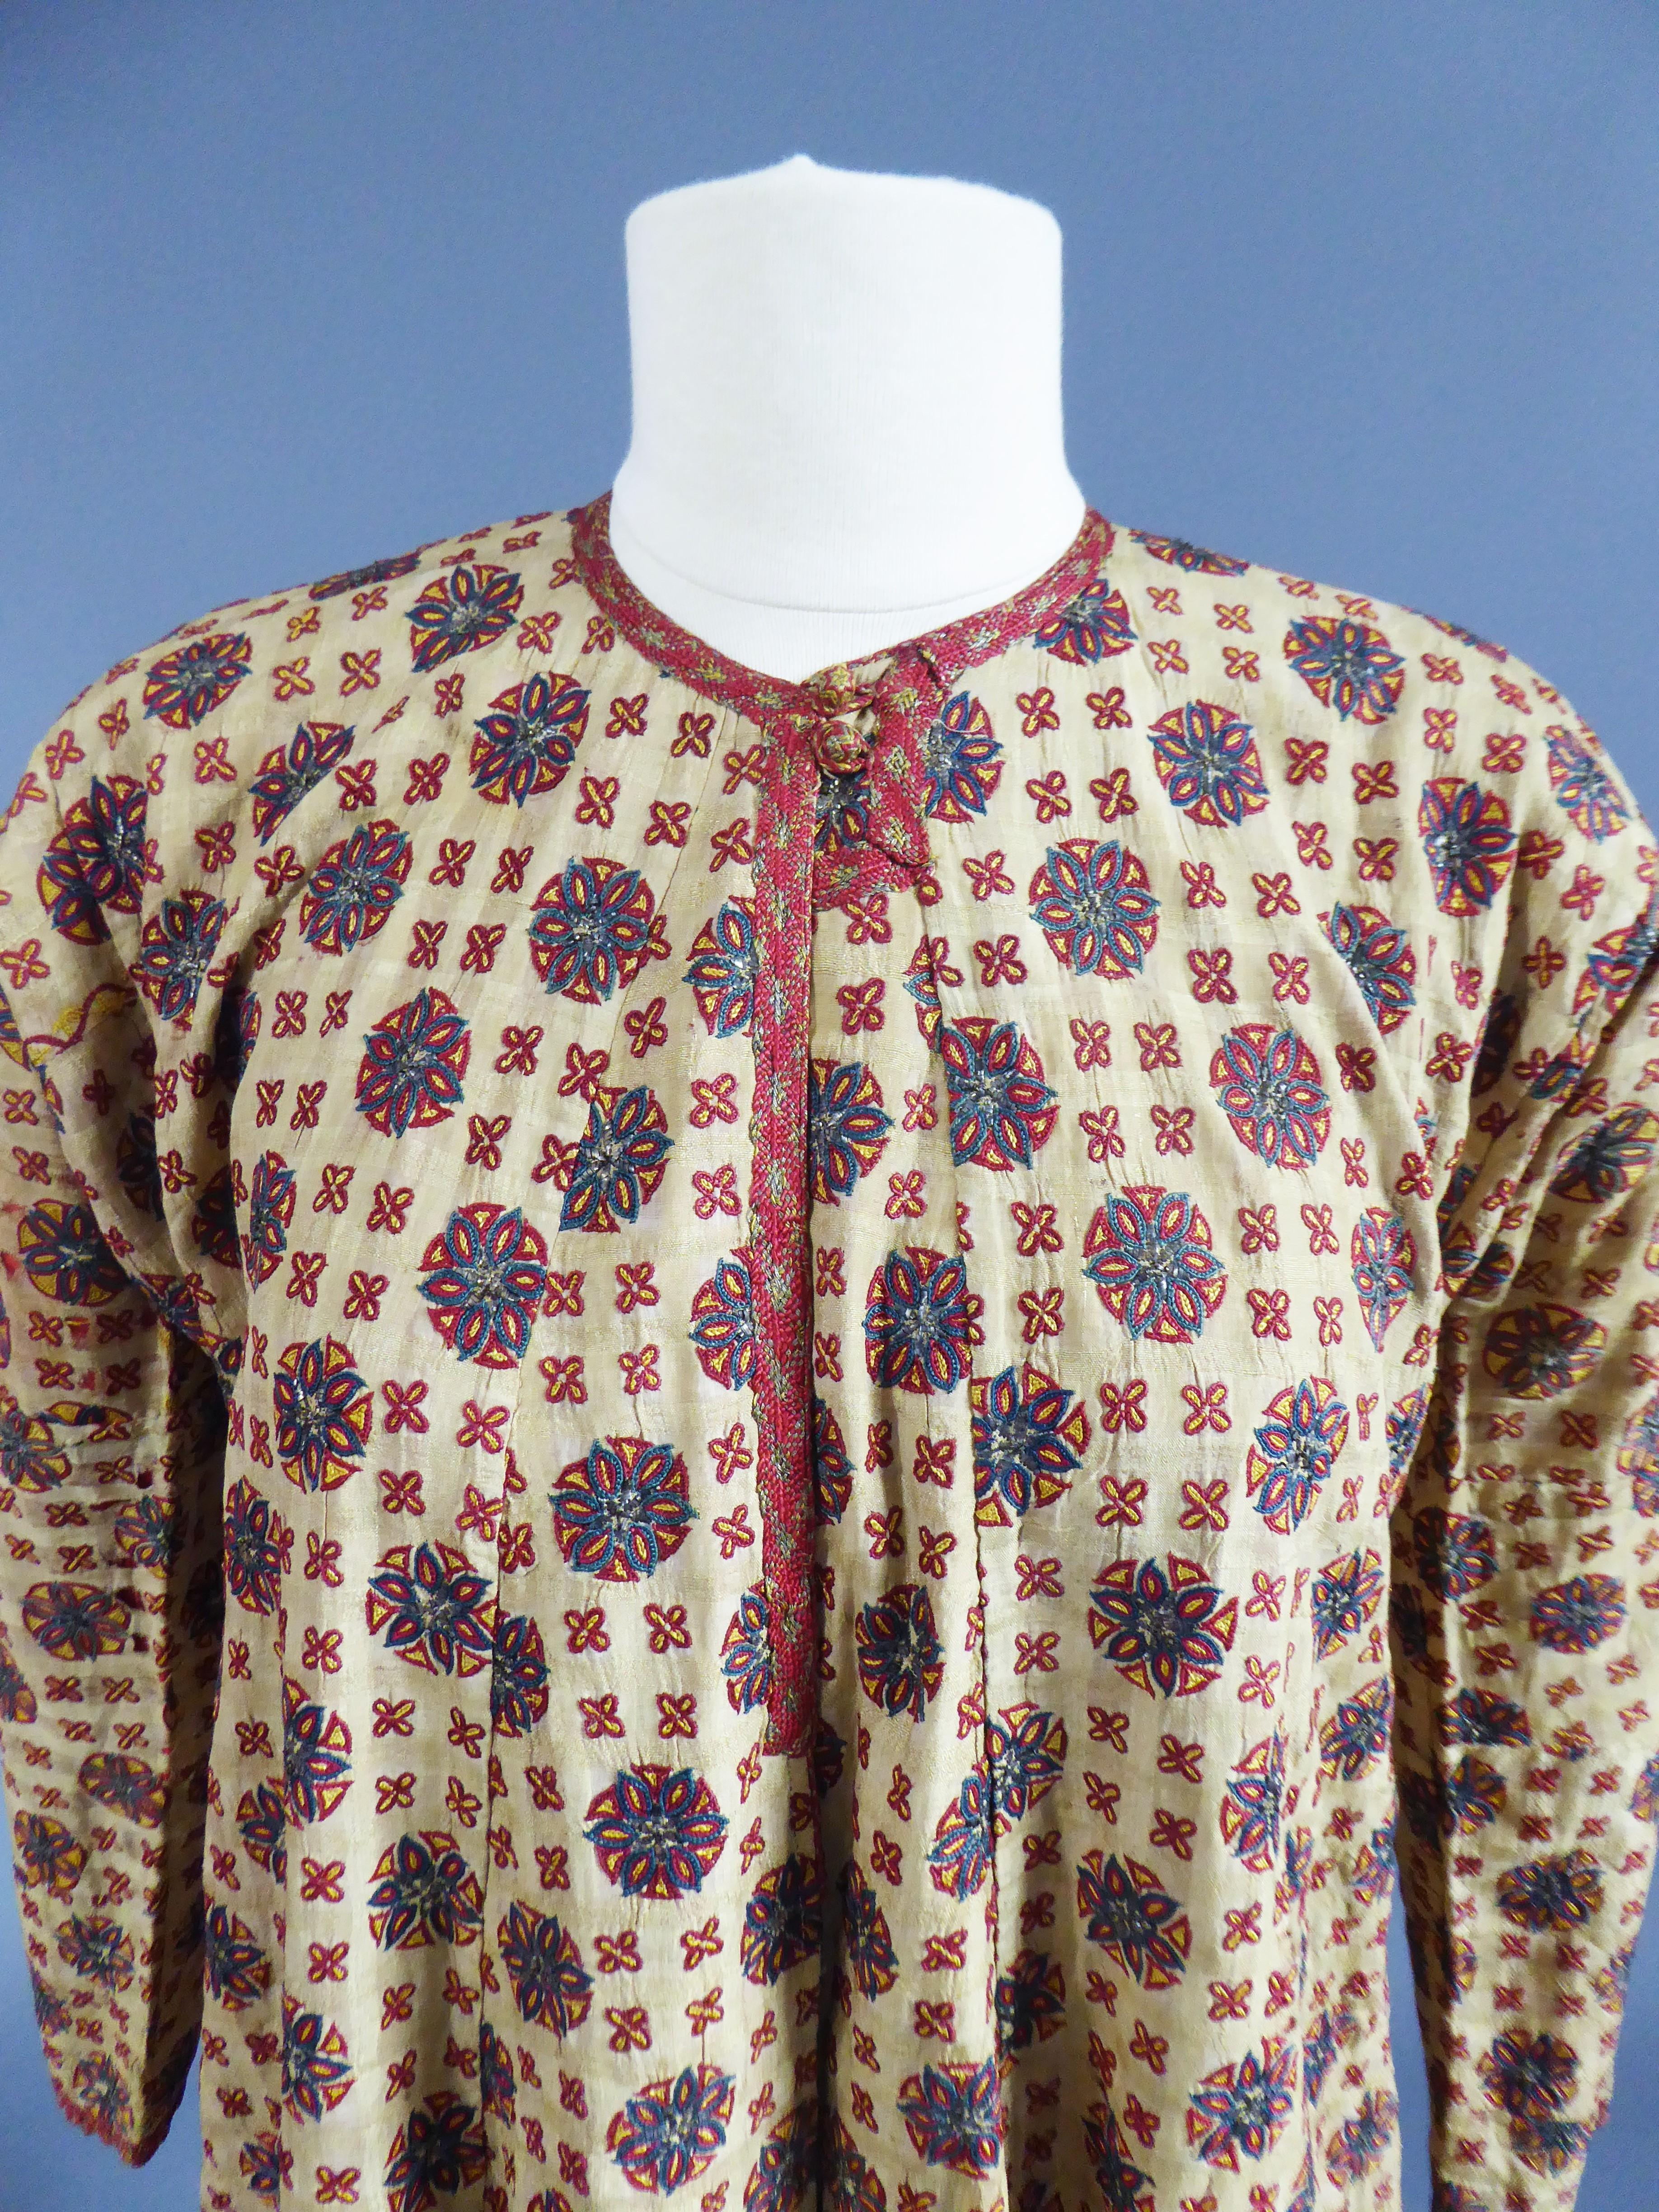 Late 18th or early 19th century
Ottoman Empire
Astonishing and very early banyan, kaftan or ottoman coat dating from the late eighteenth century. Raw silk background with woven check (Indian origin), Very finely embroidered wheels / suns with indigo